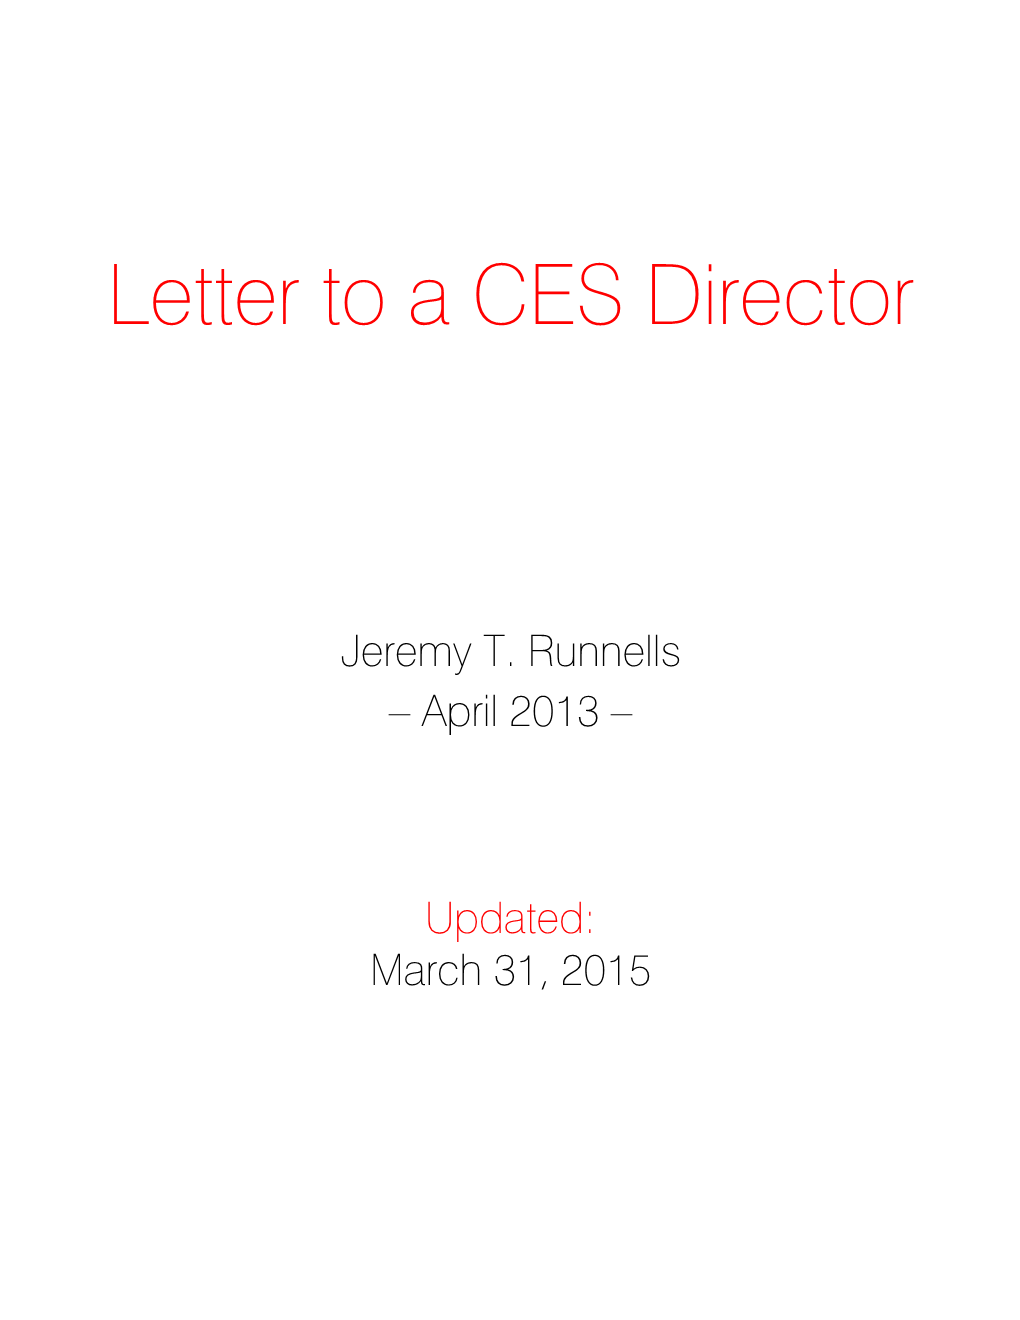 Letter to a CES Director